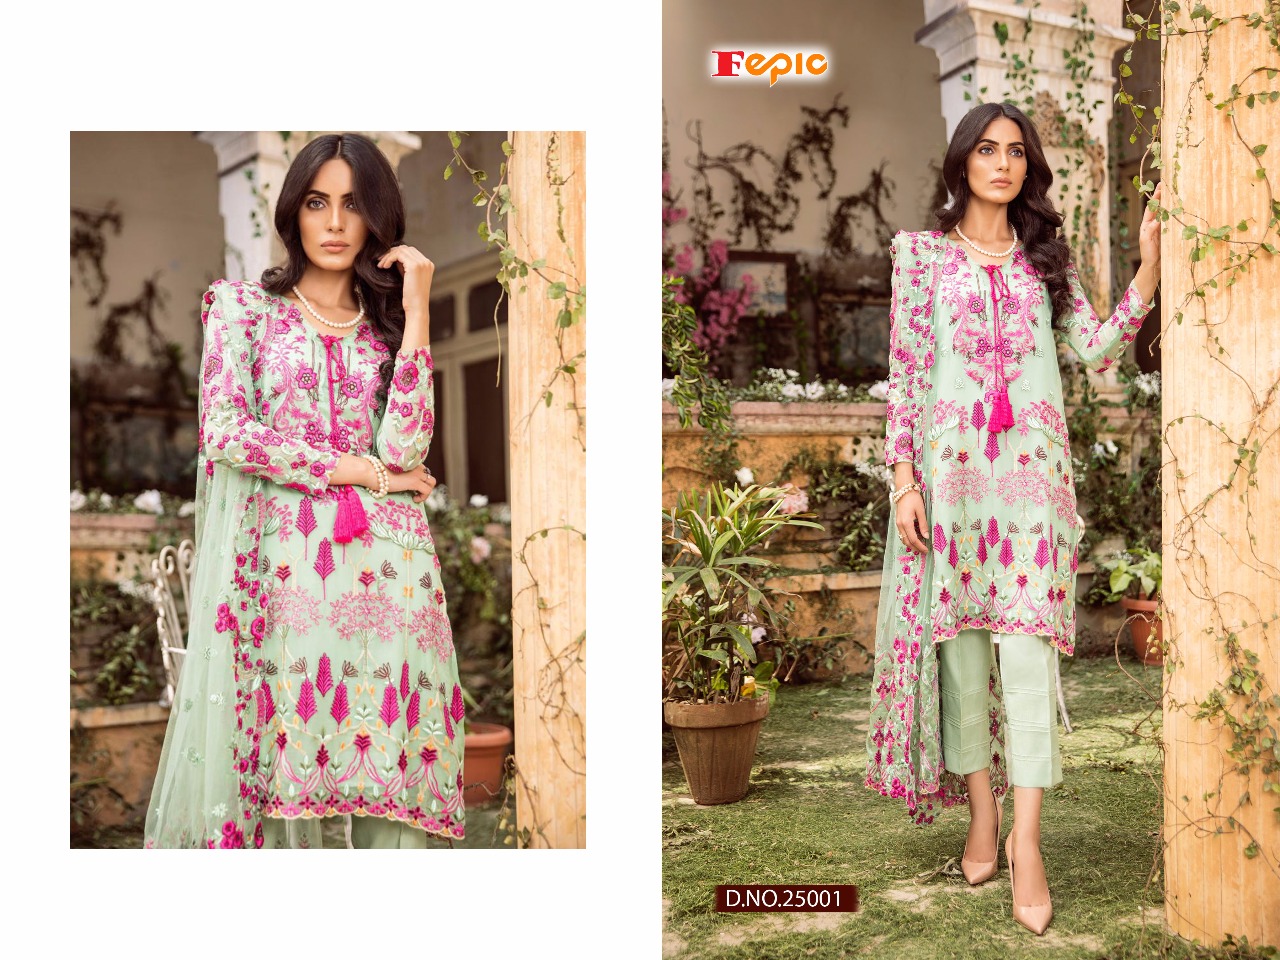 FEPIC presenting rosemeen carvings stylish pakistani collection of salwar kameez